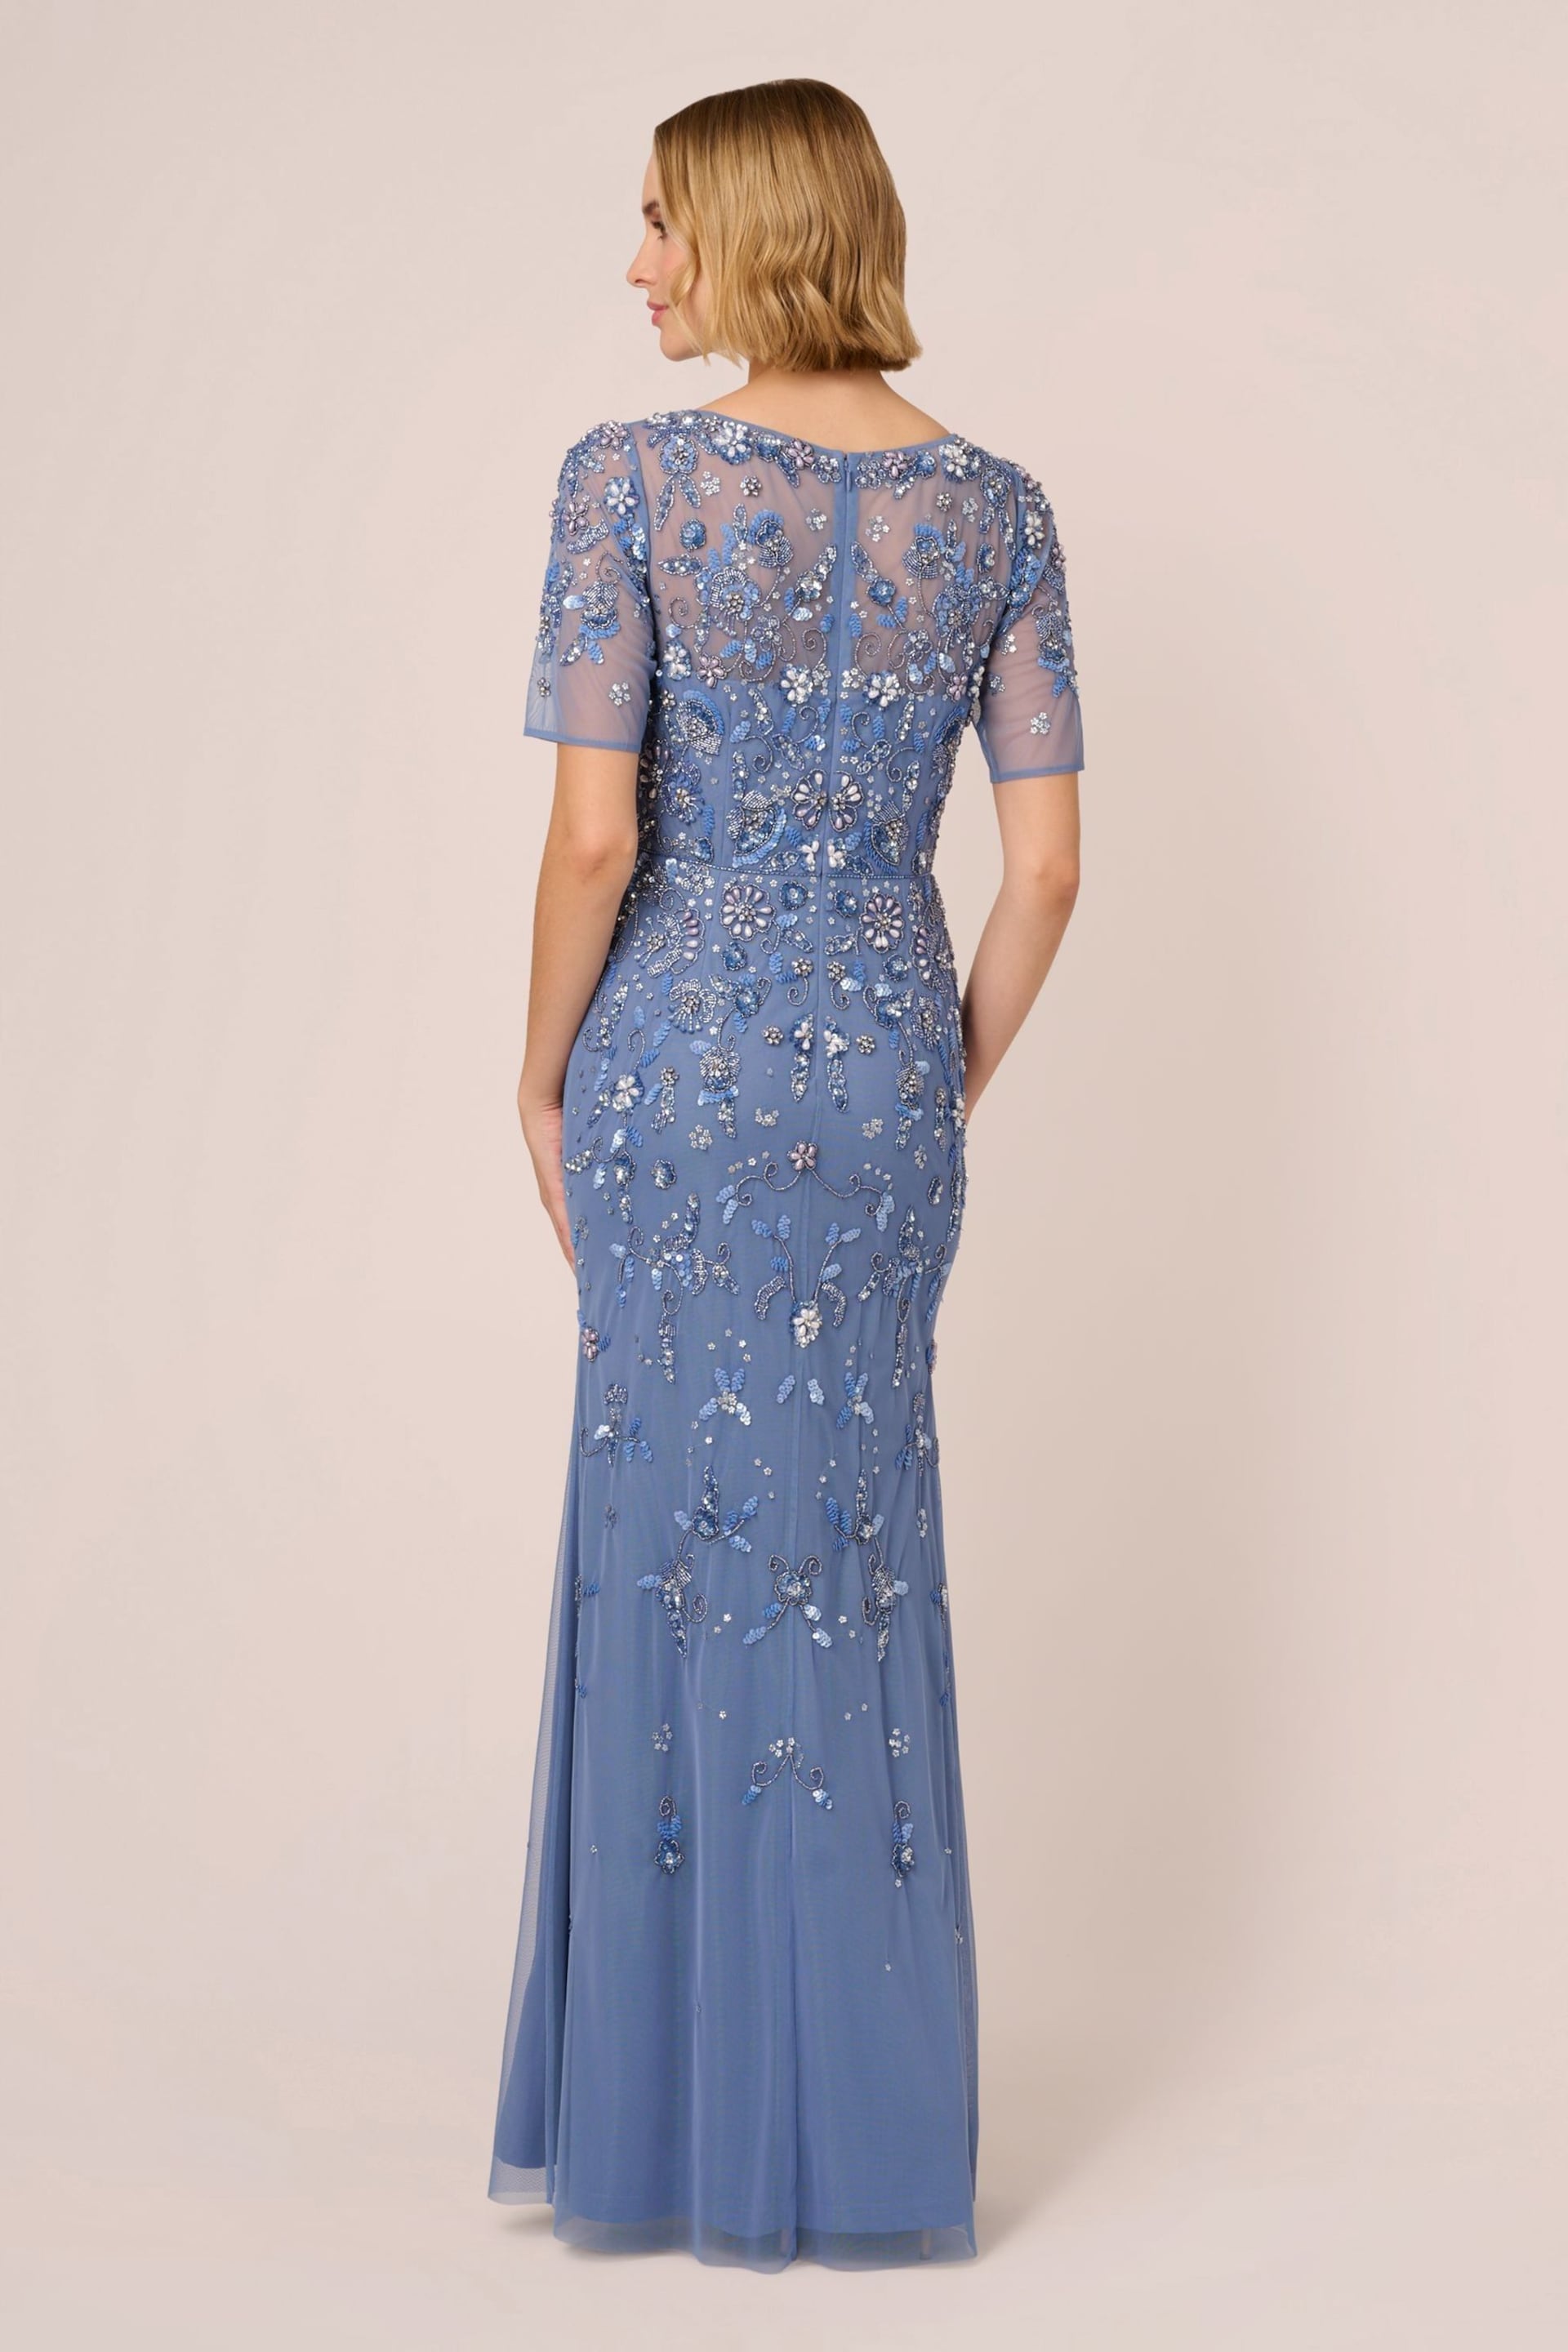 Adrianna Papell Blue Beaded Mesh Long Dress - Image 2 of 7